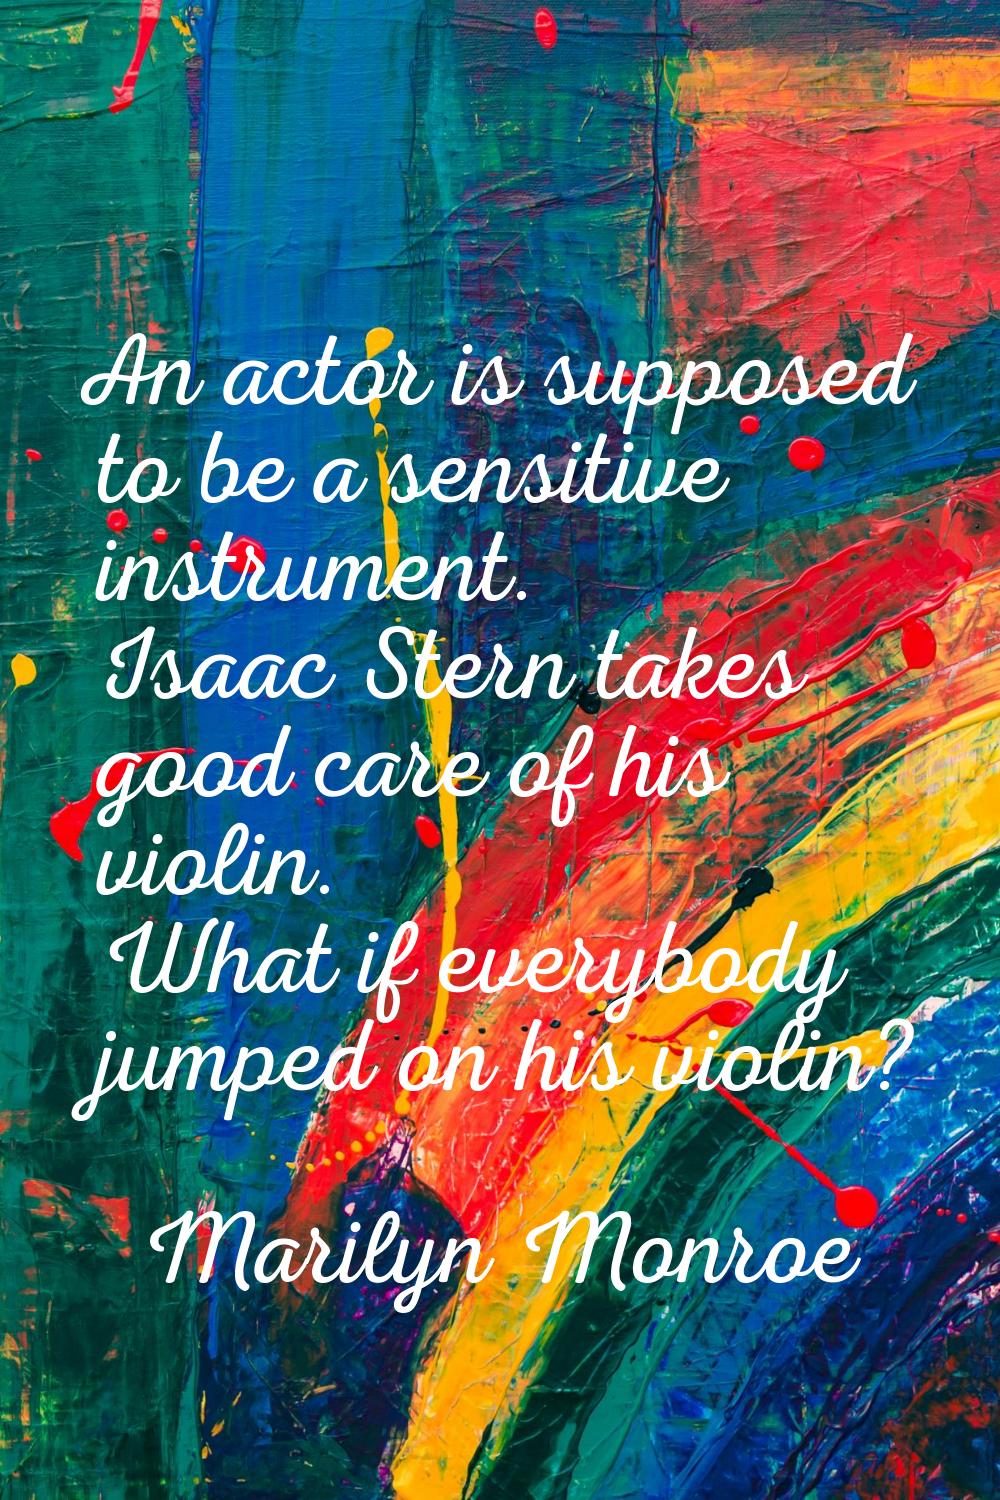 An actor is supposed to be a sensitive instrument. Isaac Stern takes good care of his violin. What 